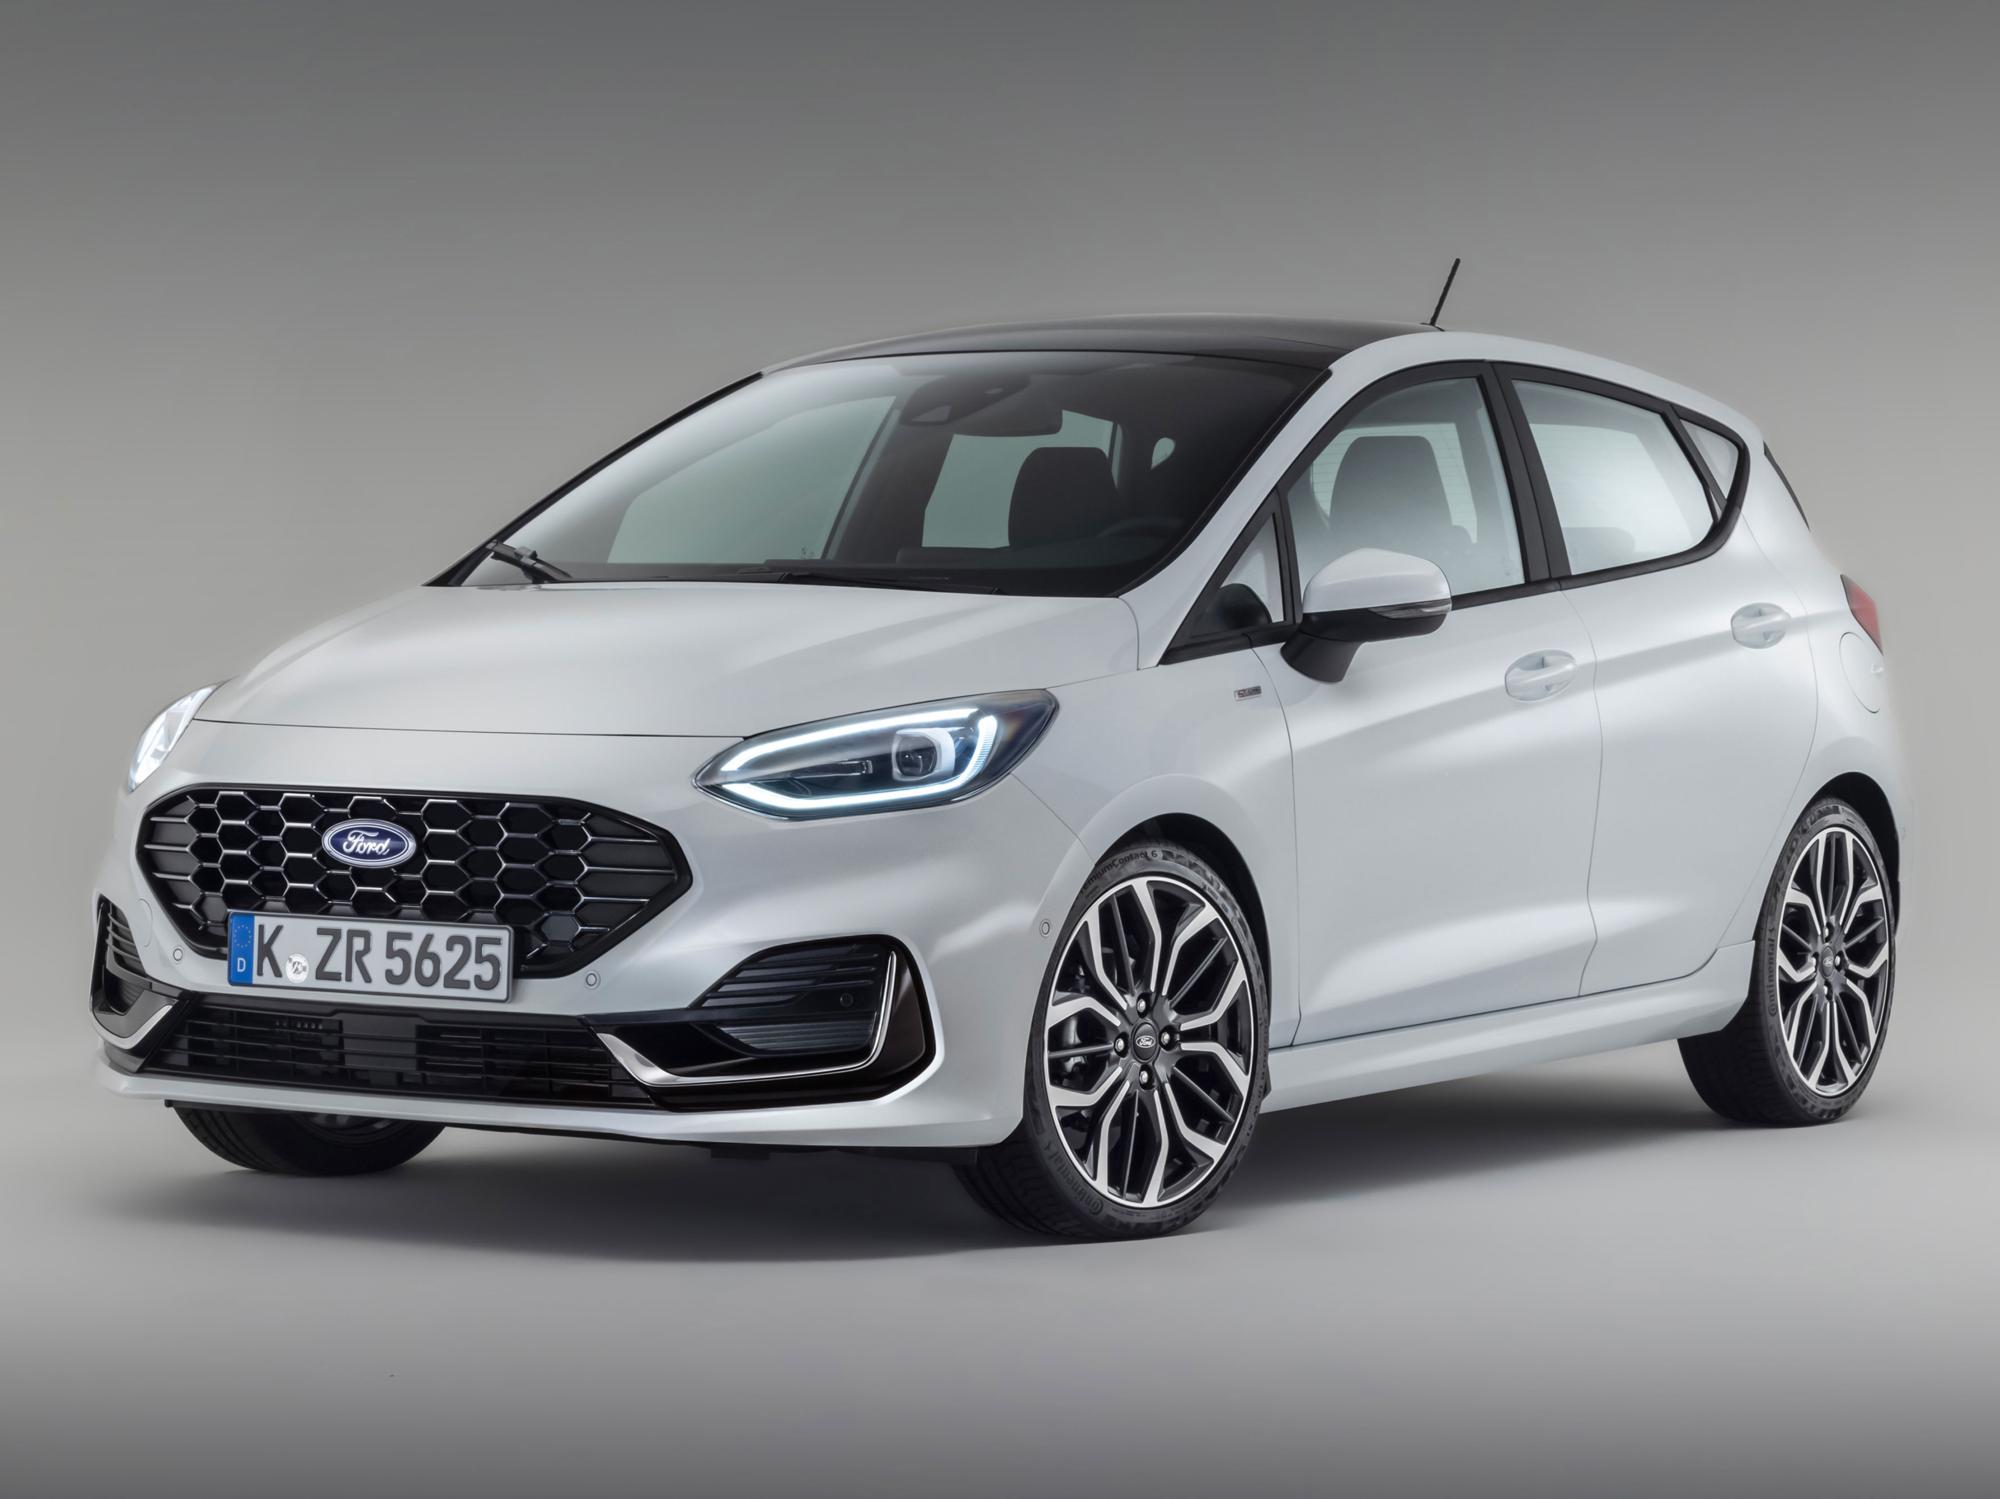 Ford Fiesta (2017-) review - Which?